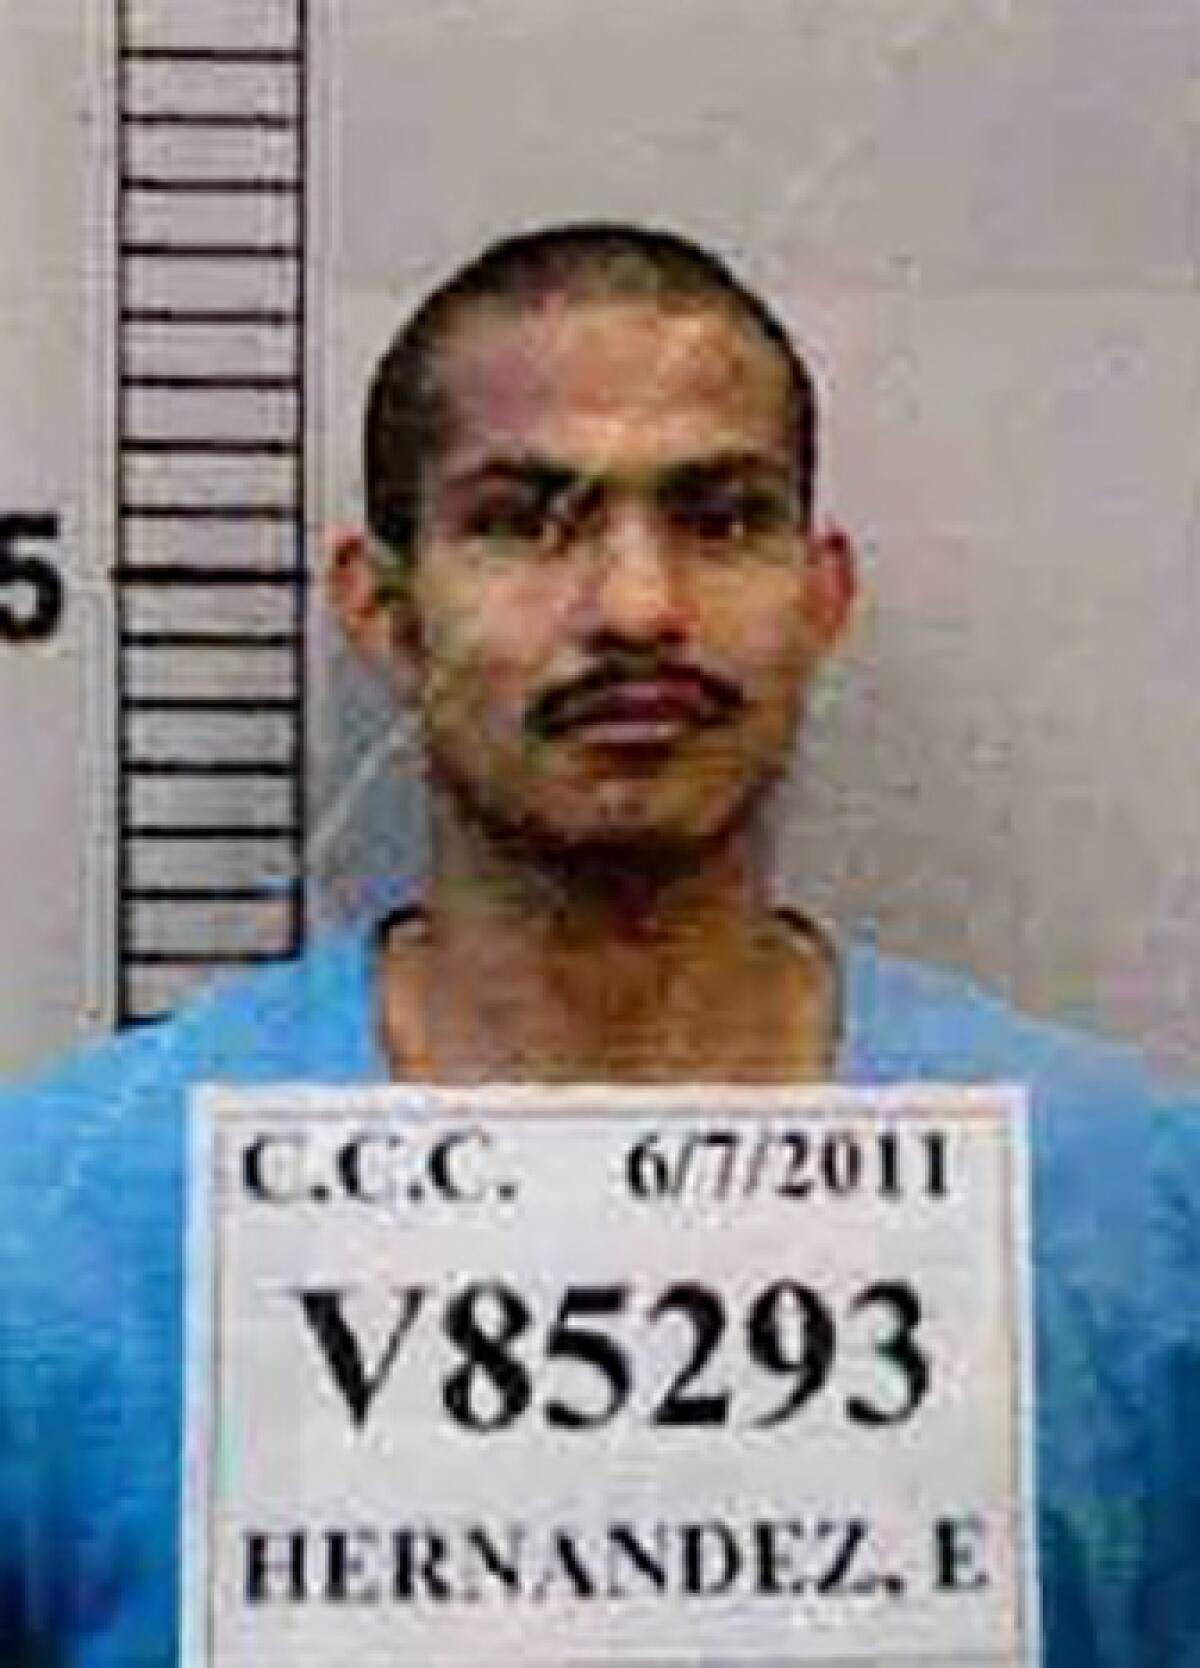 A booking photo of Eduardo Hernandez in blue jail garb, standing beside a height chart with a placard indicating arrest info